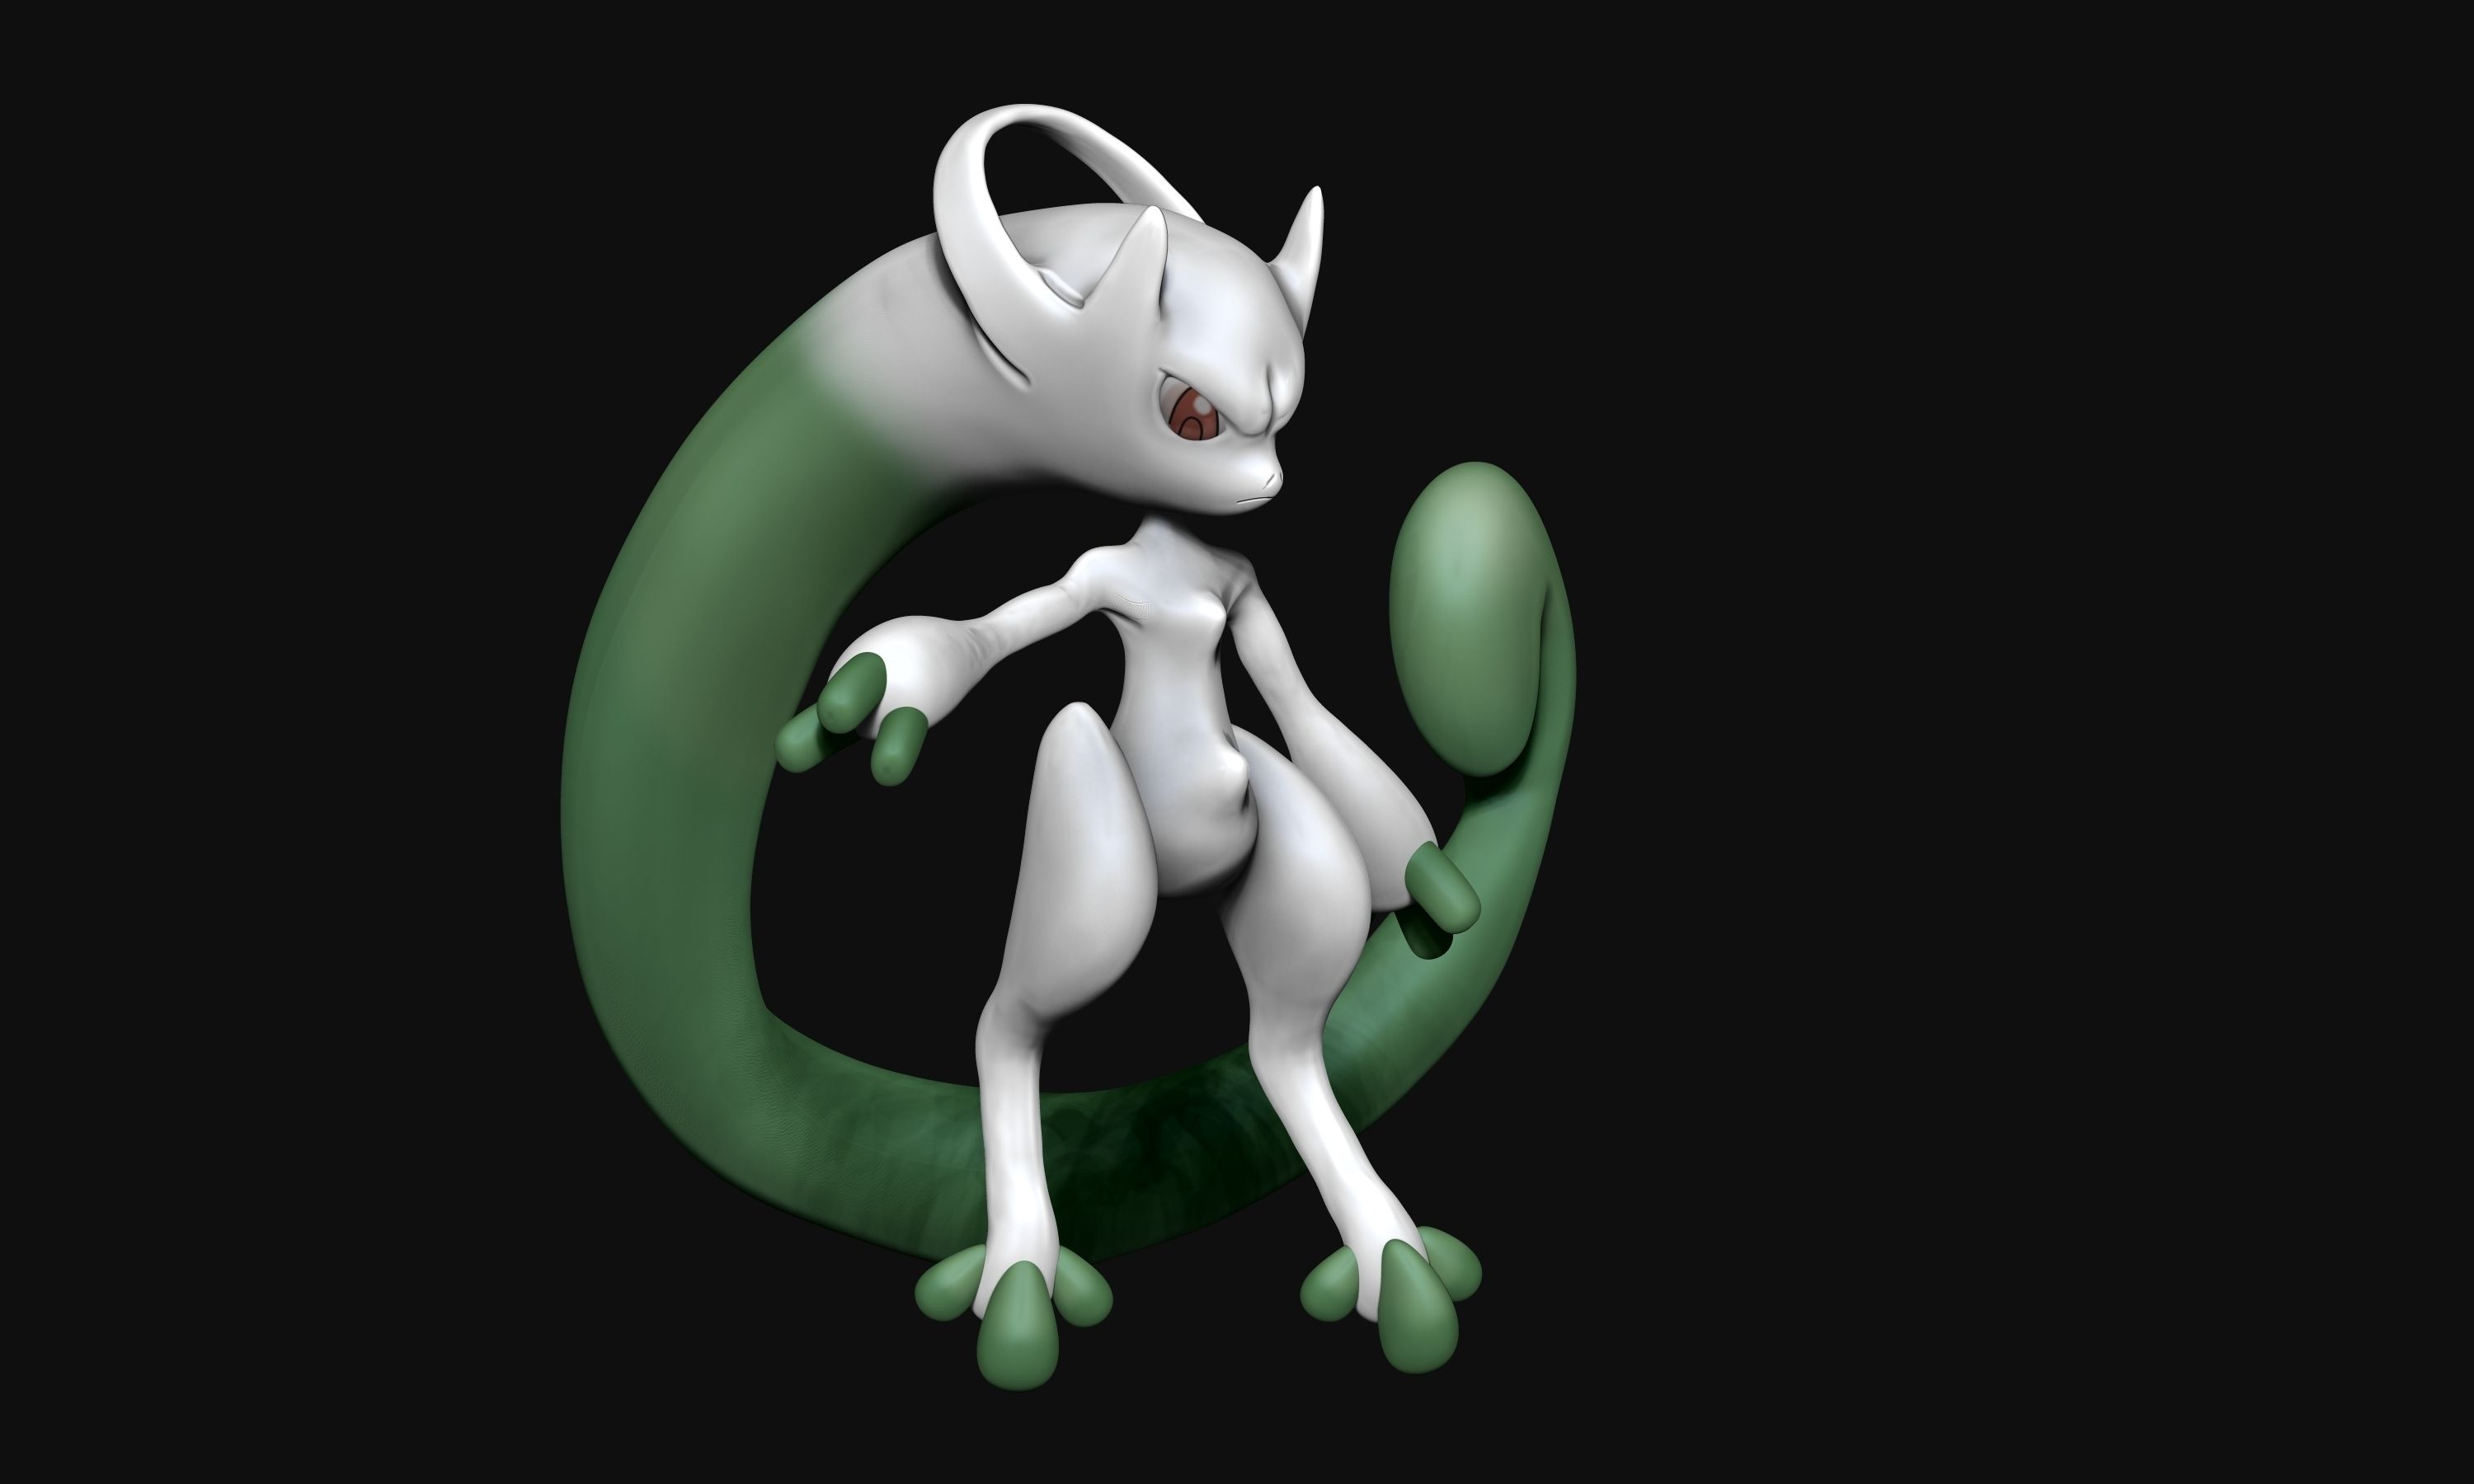 mega-mewtwo-y-2.jpg Download OBJ file Pokemon - Mega Mewtwo Y(with cuts and as a whole) • 3D printer template, ErickFontoura3D